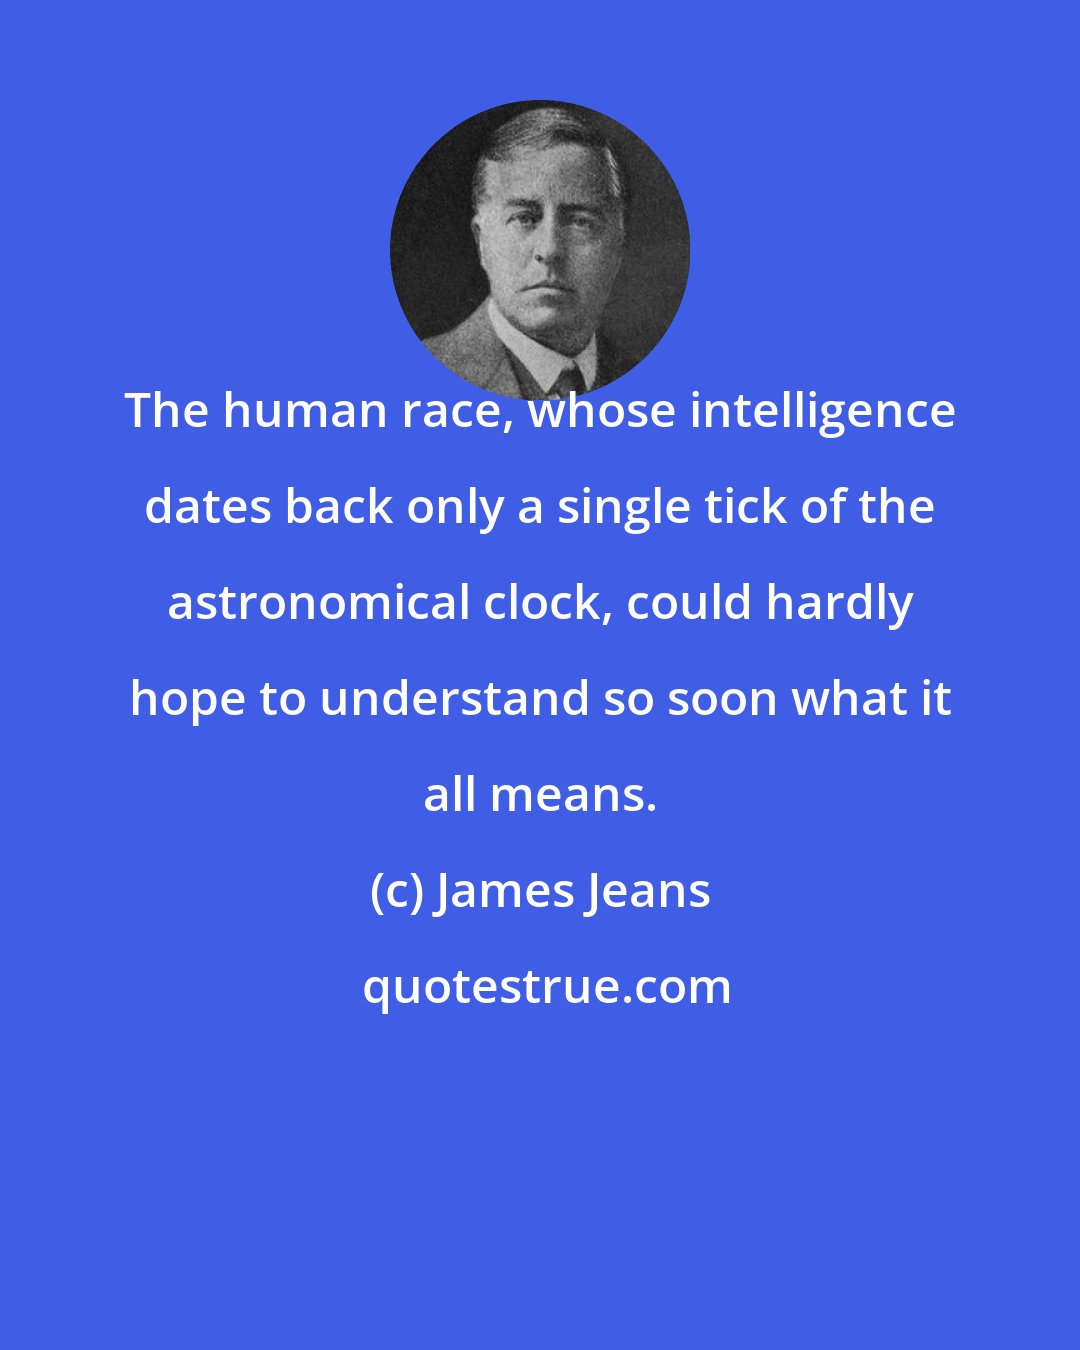 James Jeans: The human race, whose intelligence dates back only a single tick of the astronomical clock, could hardly hope to understand so soon what it all means.